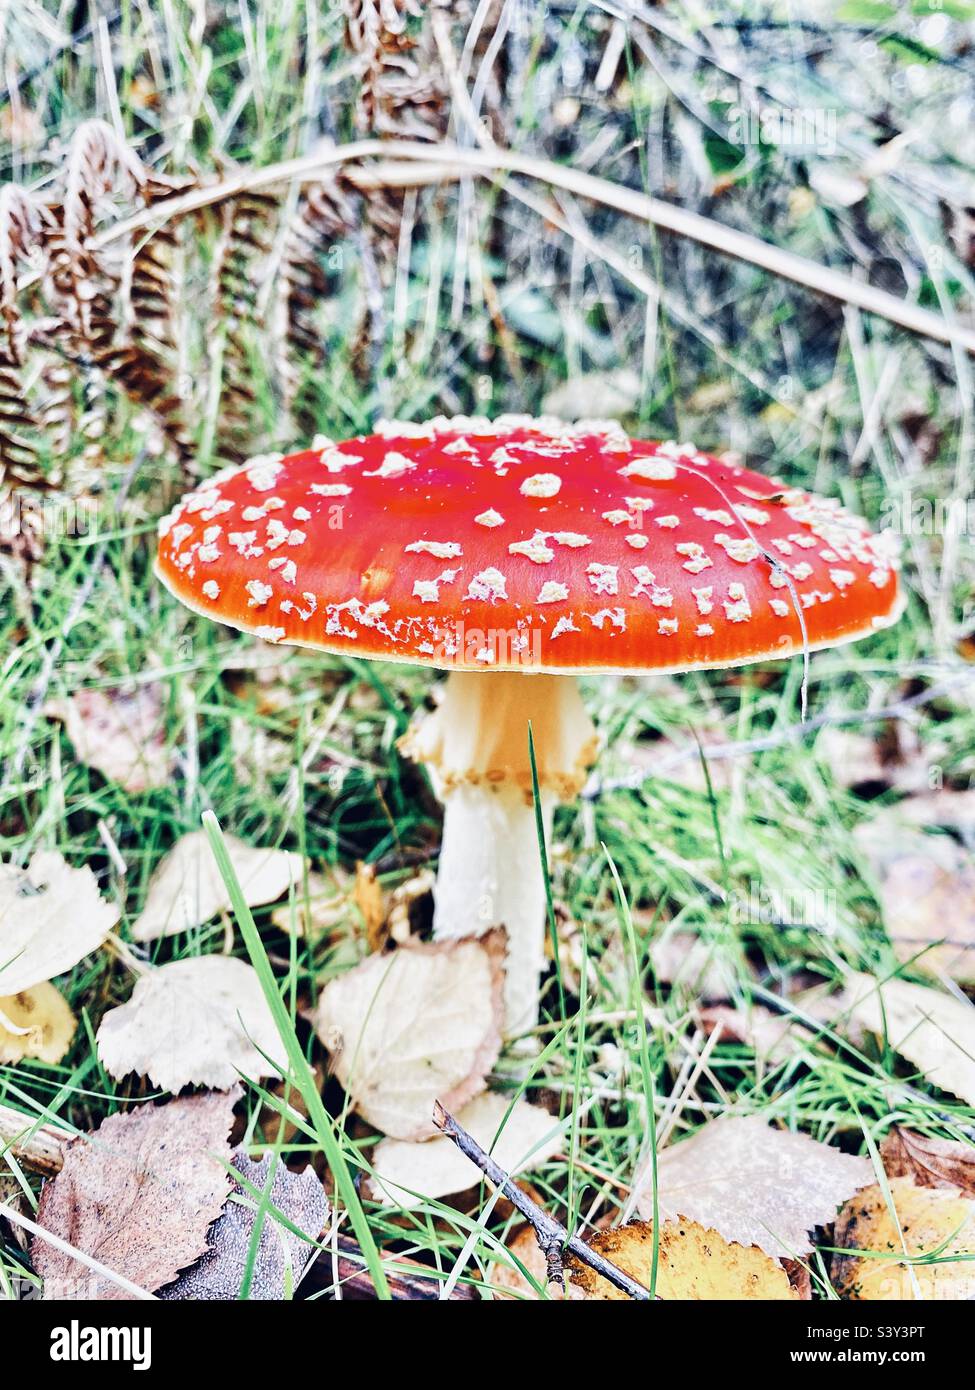 Foraging for mushrooms - Fly Agaric. Red mushroom. Stock Photo